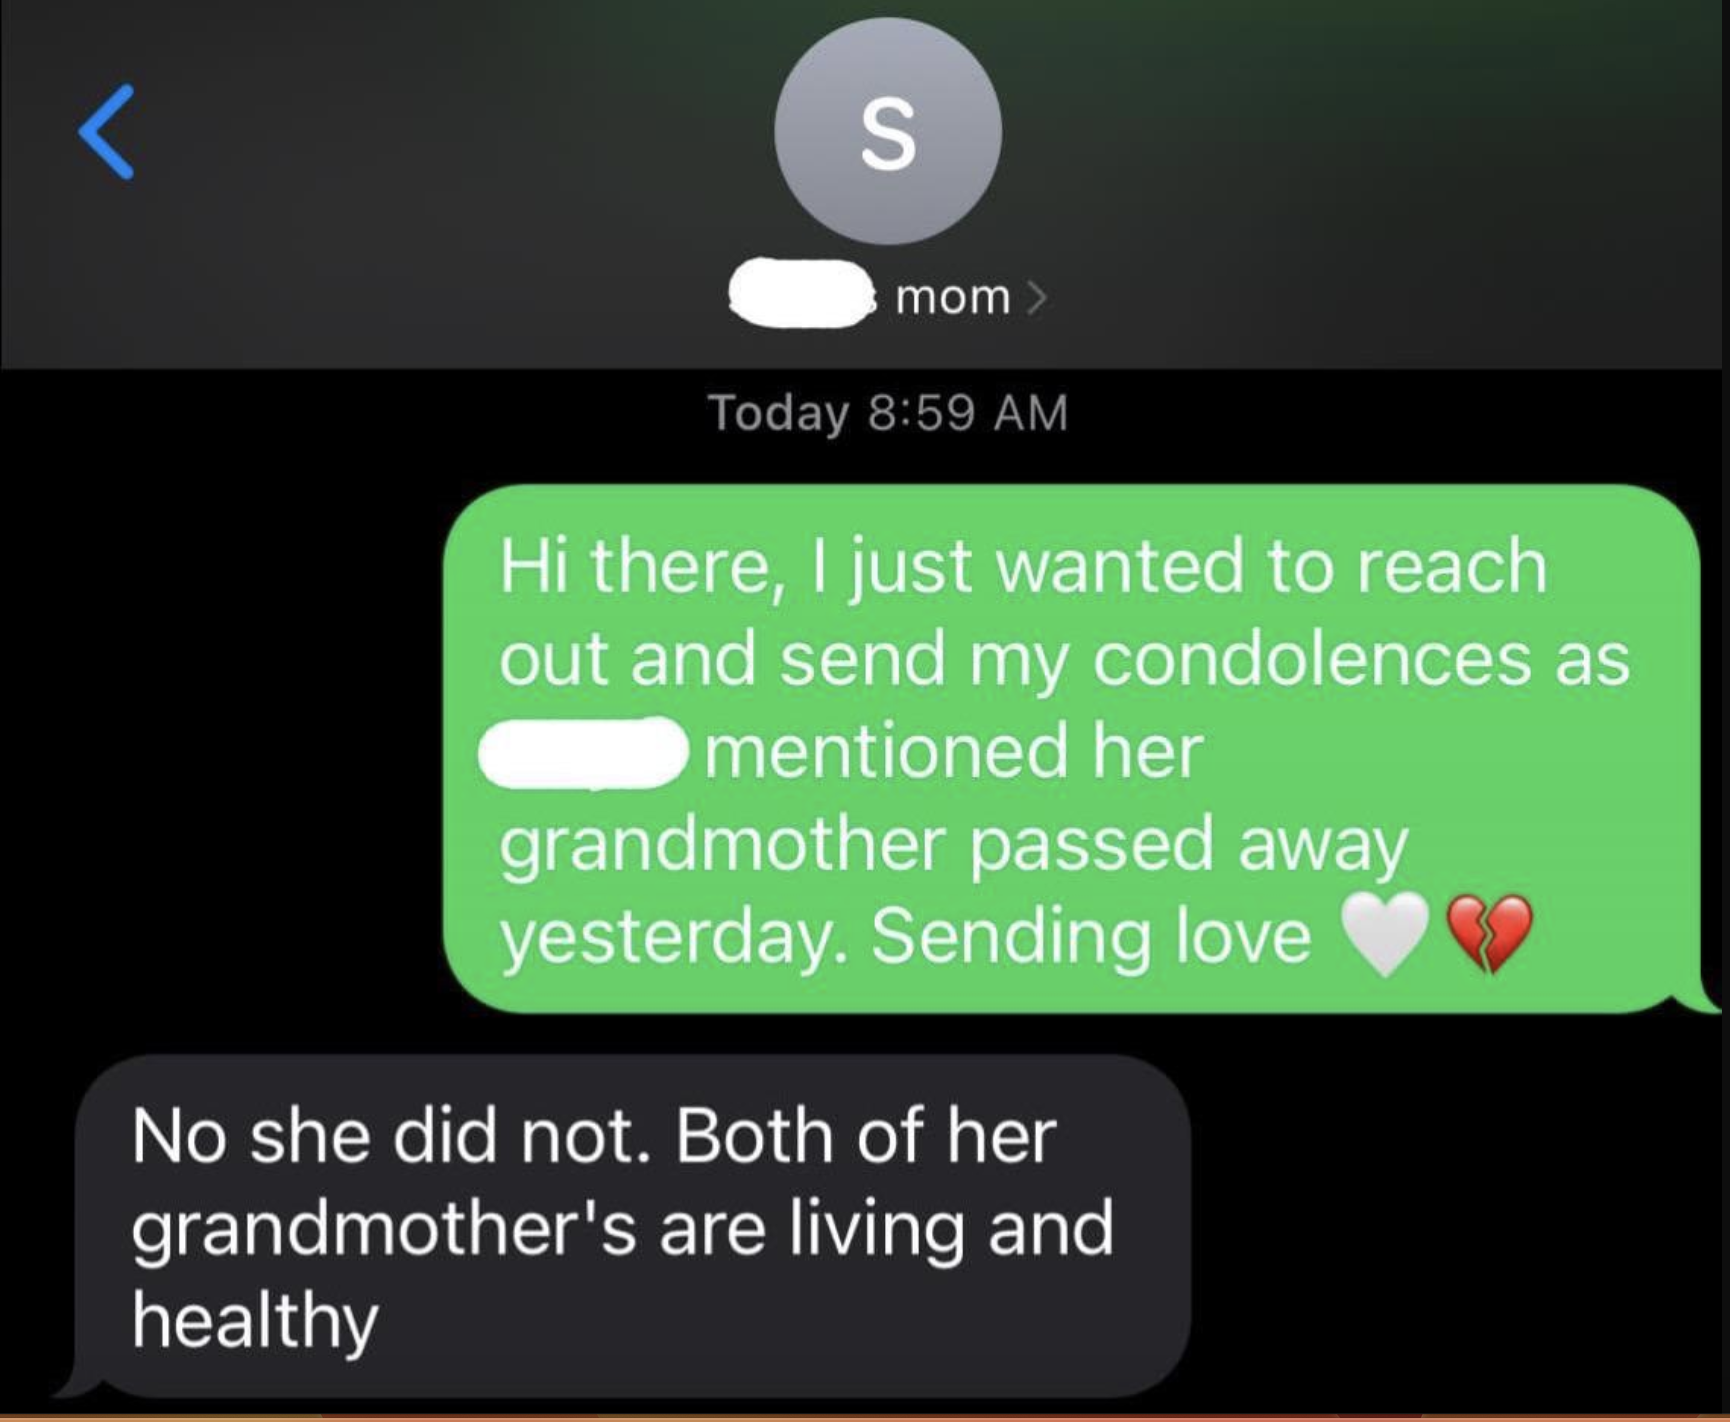 mom&#x27;s message says, no both of her grandmothers are living and healthy